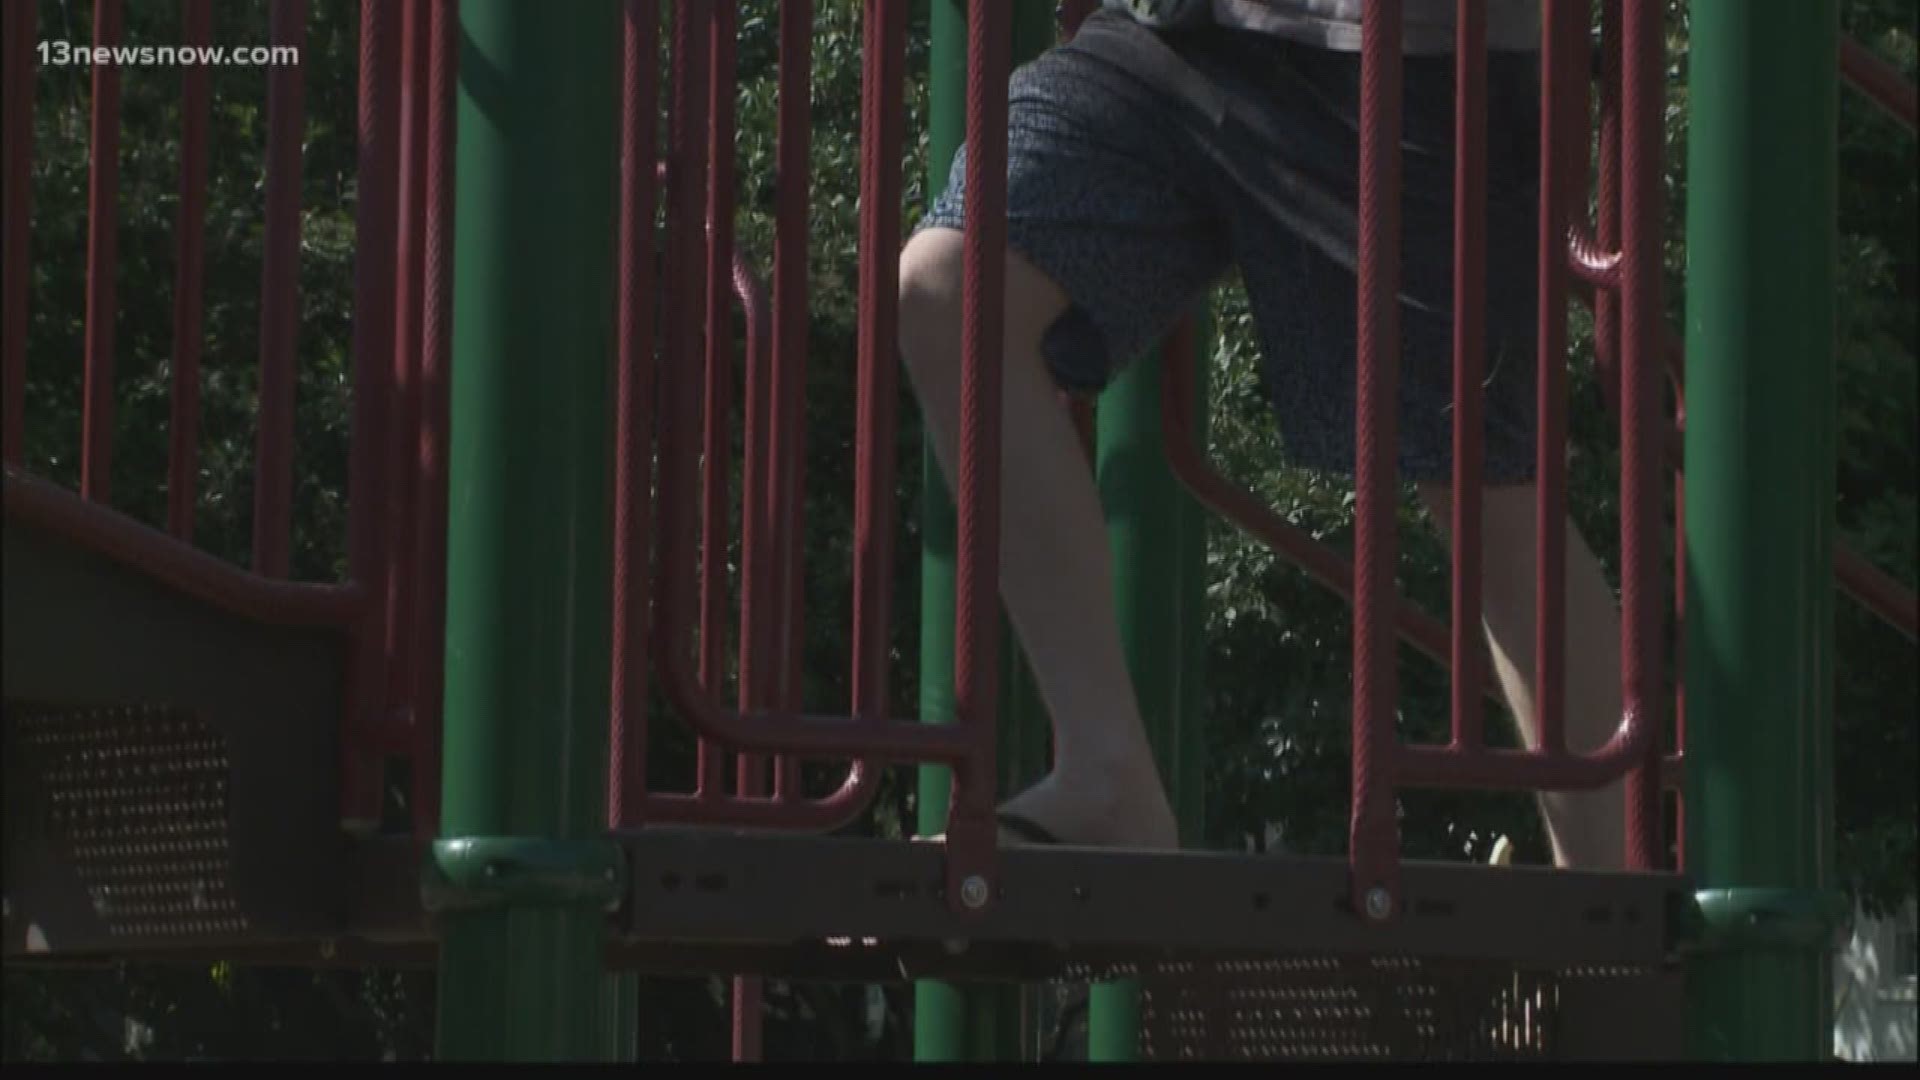 New technology is coming to neighborhood parks! A company introduced an app designed to keep children active.